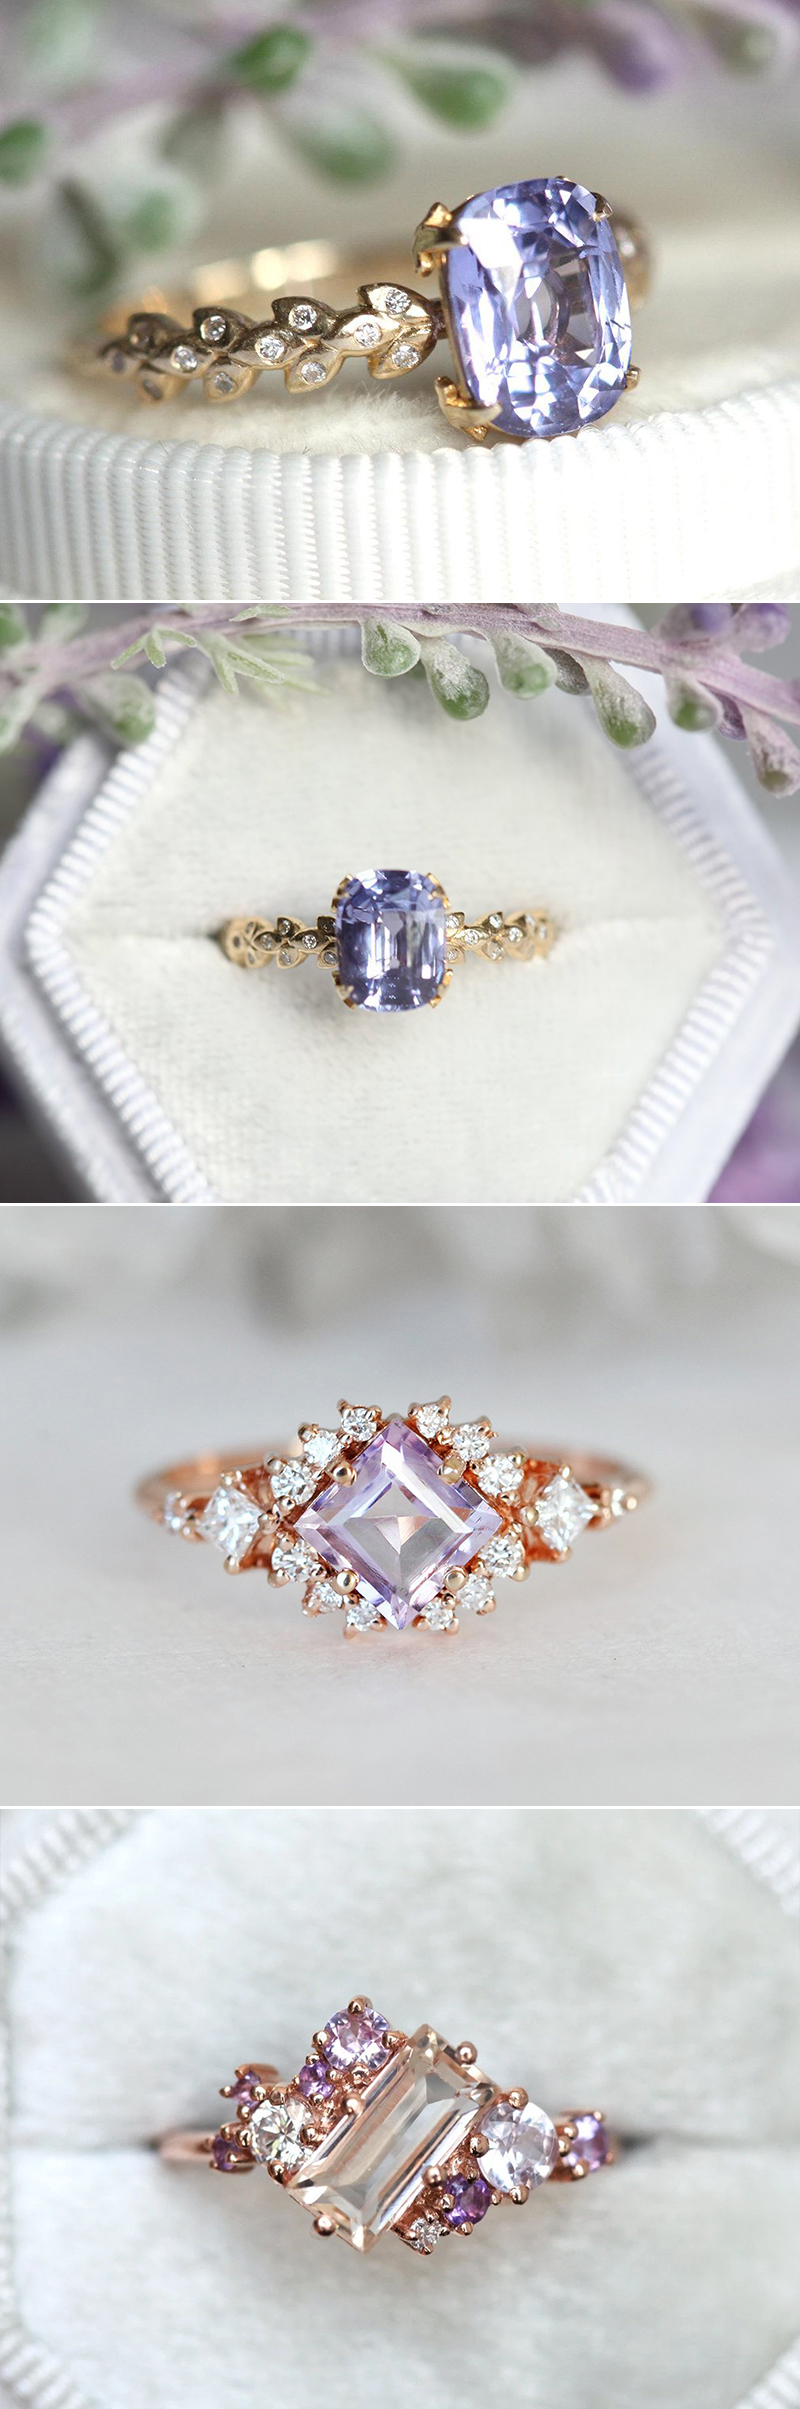 Engagement Rings, Gemstone Engagement Rings, Unique Engagement Rings |  Glamour